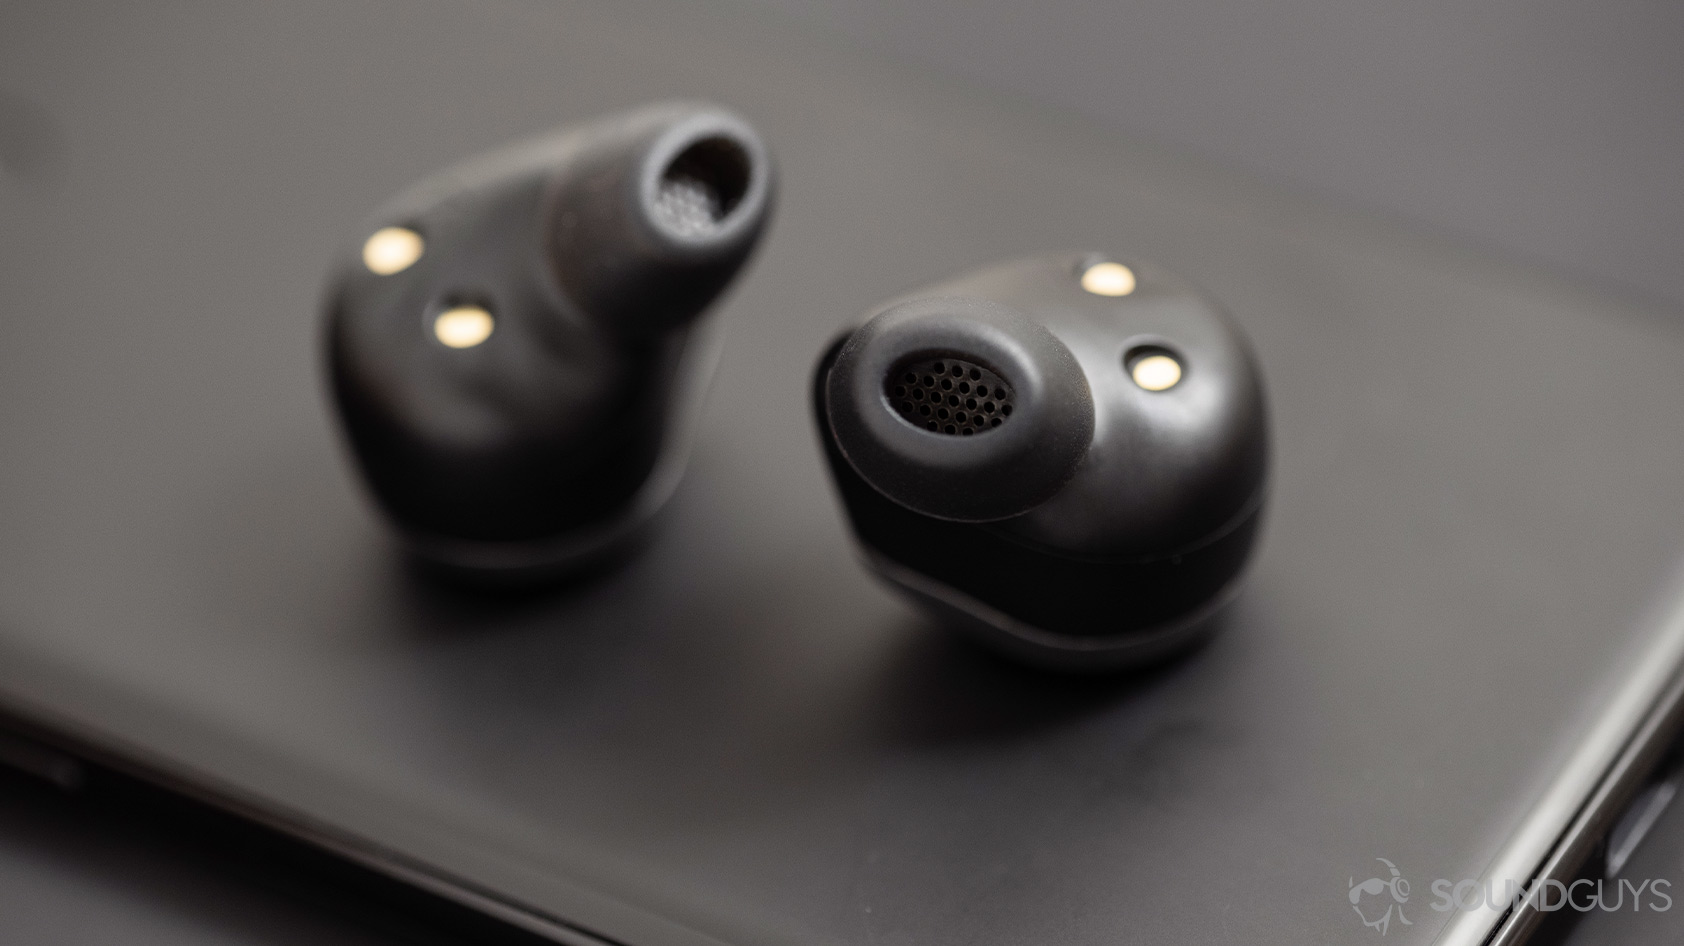 The Jabra Elite 85t noise canceling true wireless earbuds' oblong ear tips and nozzles.